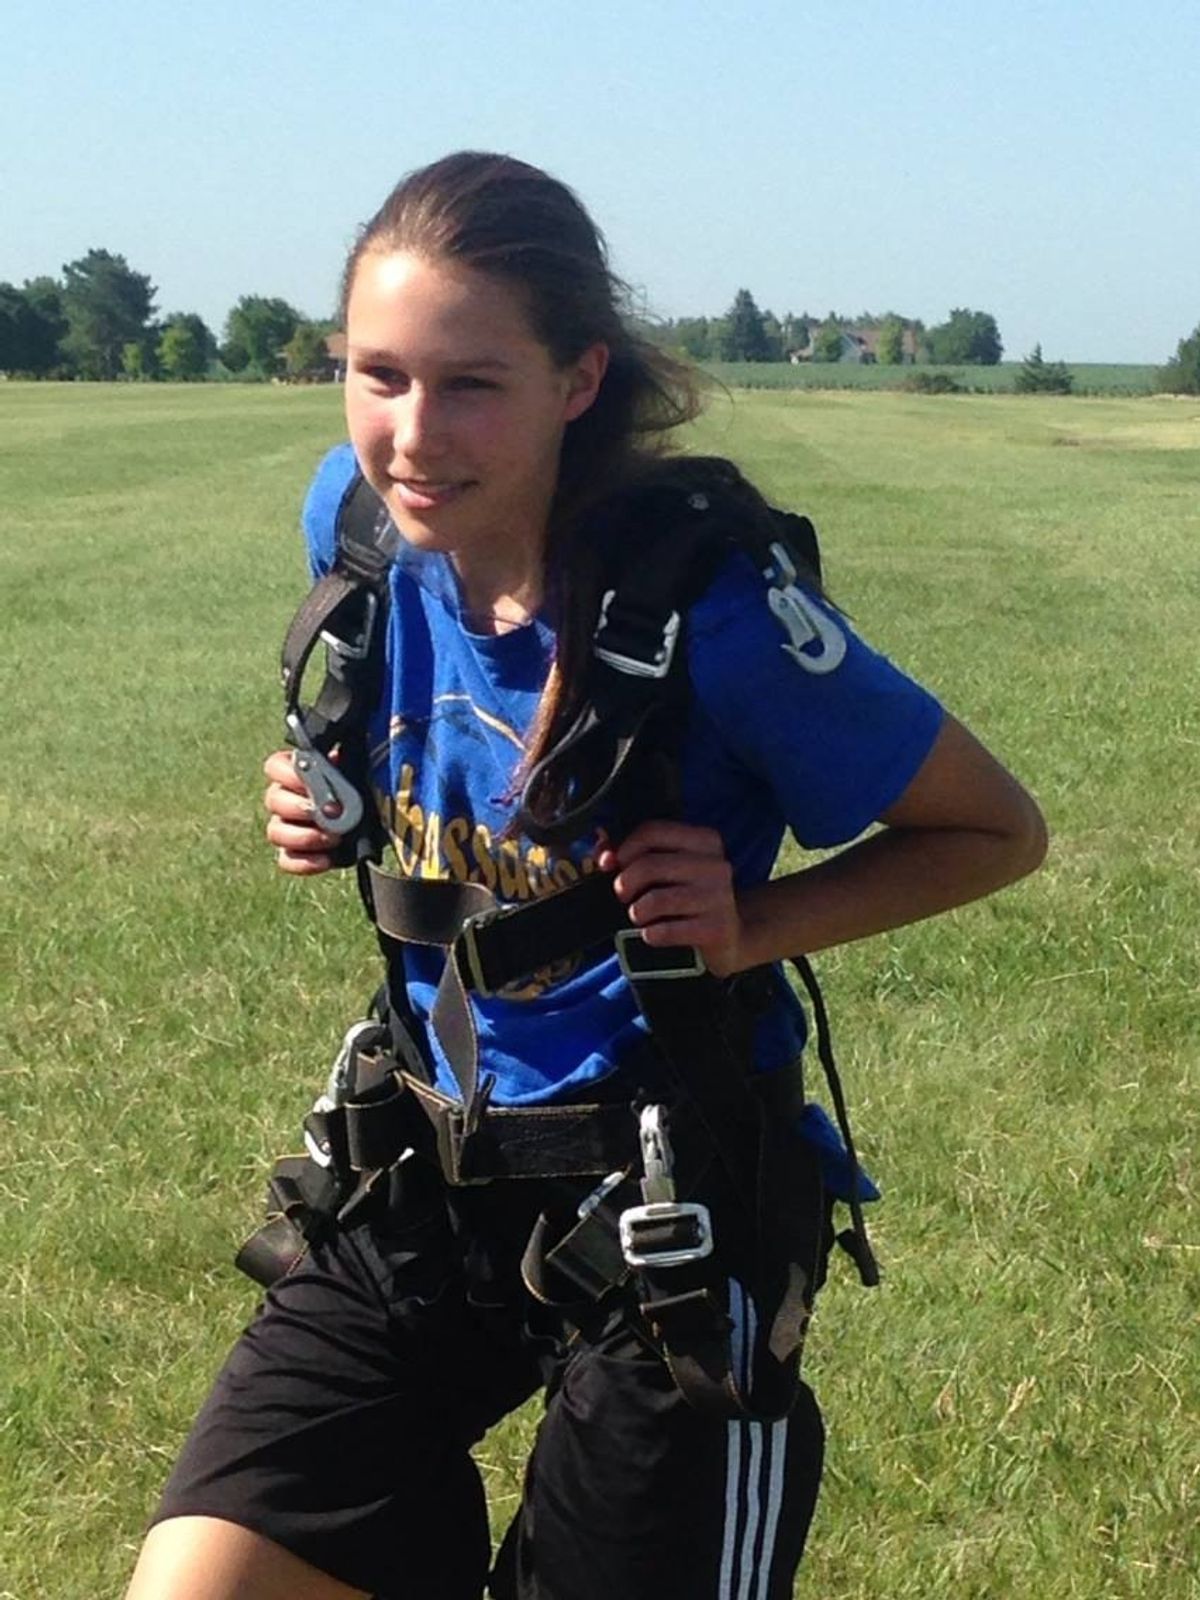 Skydiving Helped Me Embrace Who I Really Am